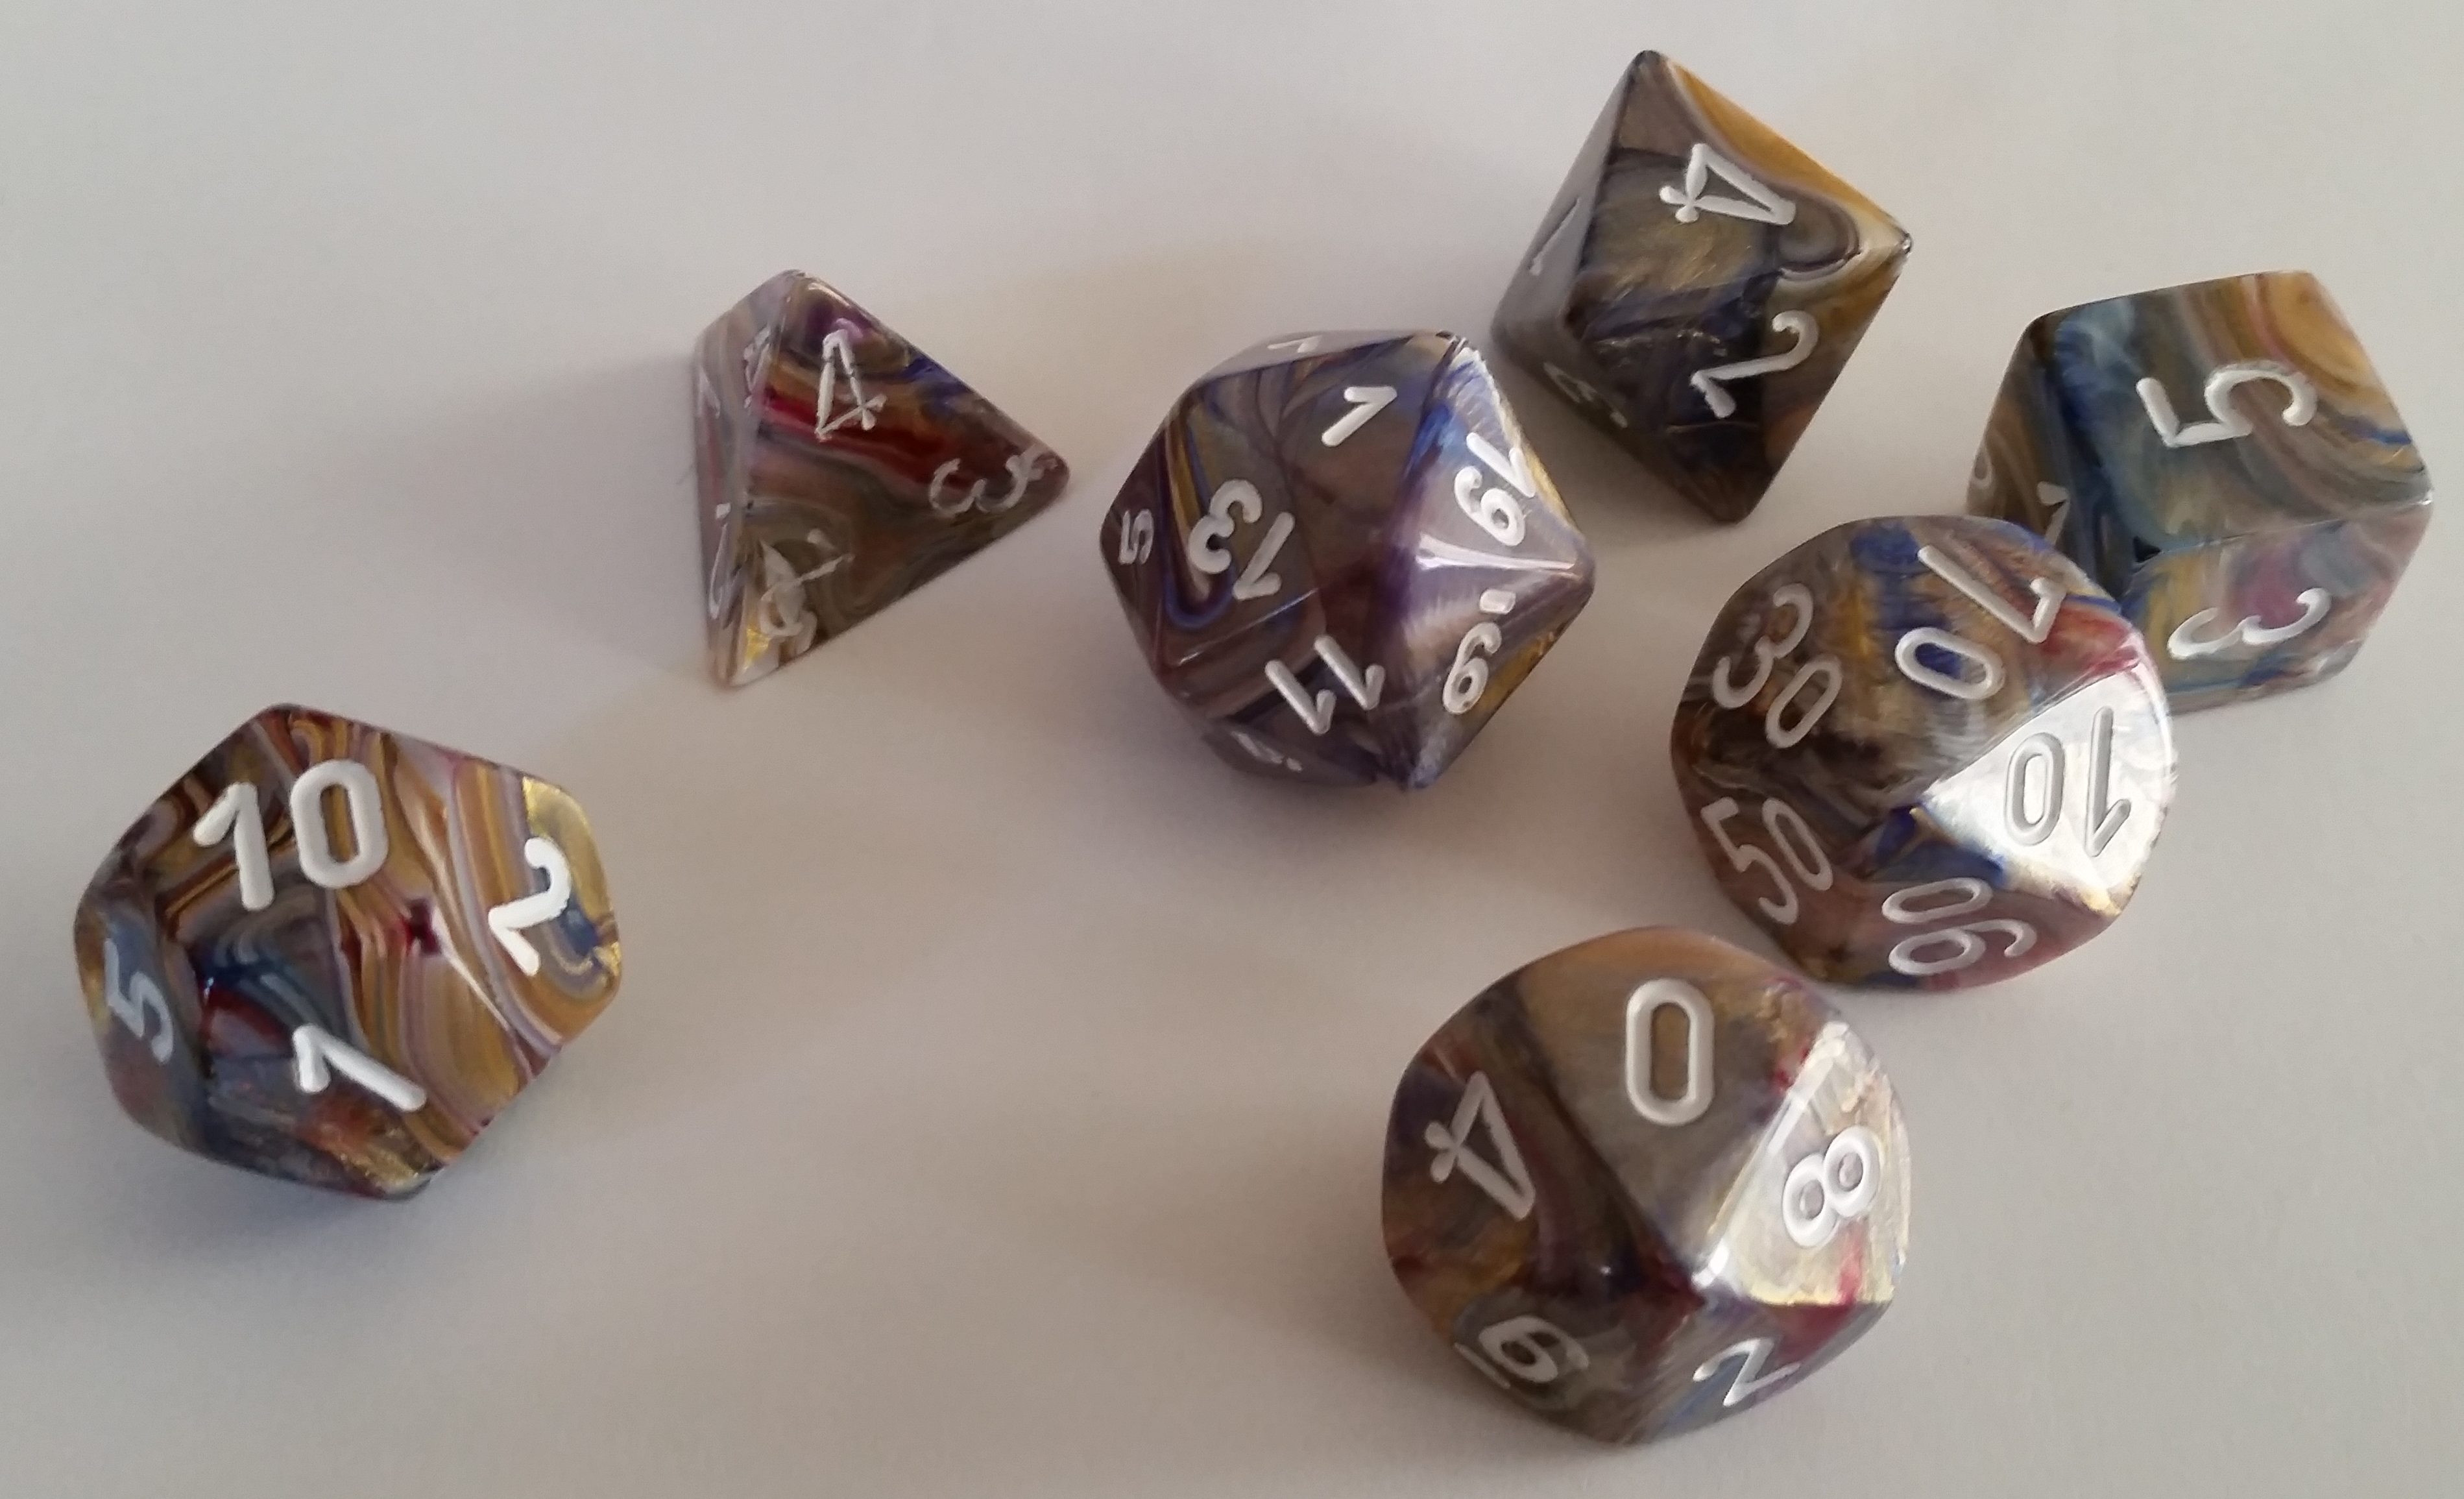 A collection of dice